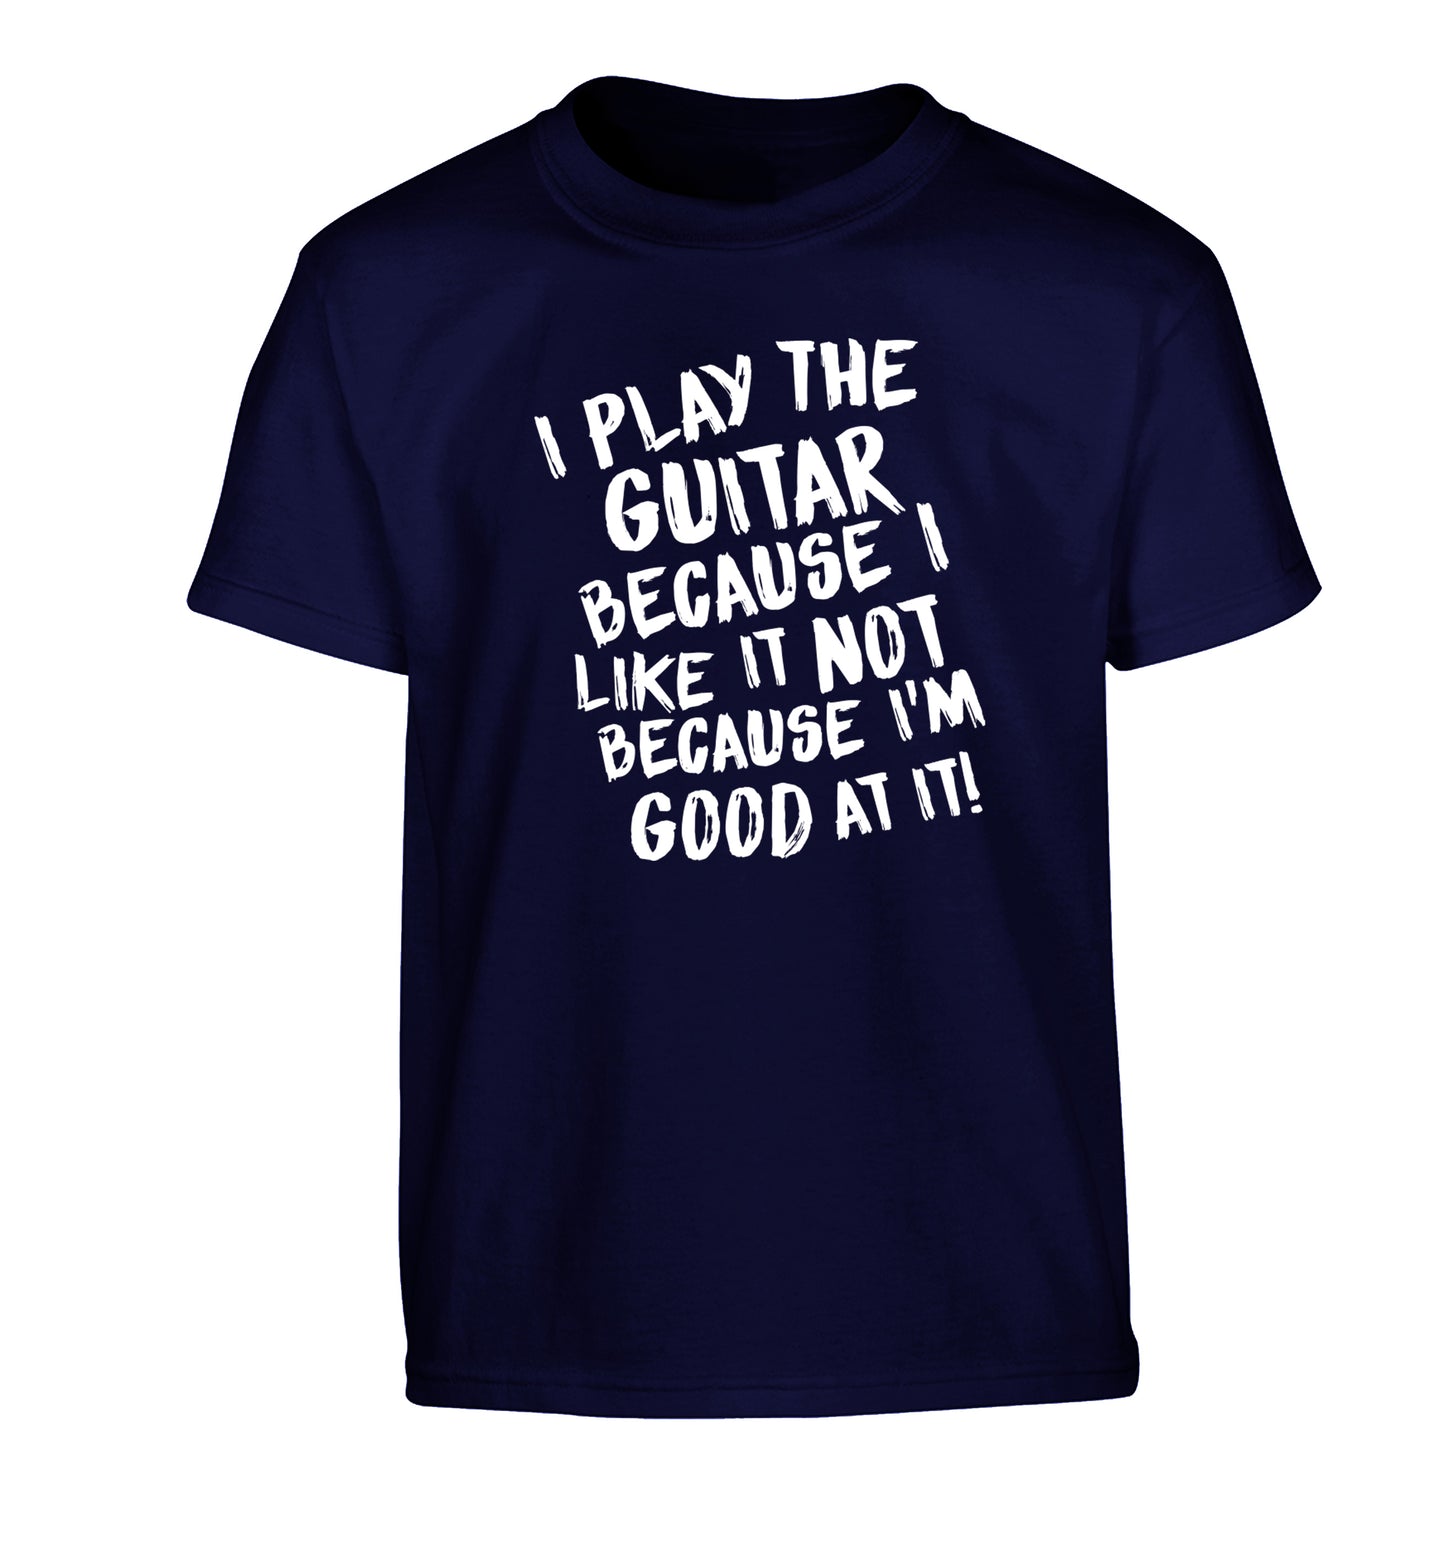 I play the guitar because I like it not because I'm good at it Children's navy Tshirt 12-14 Years